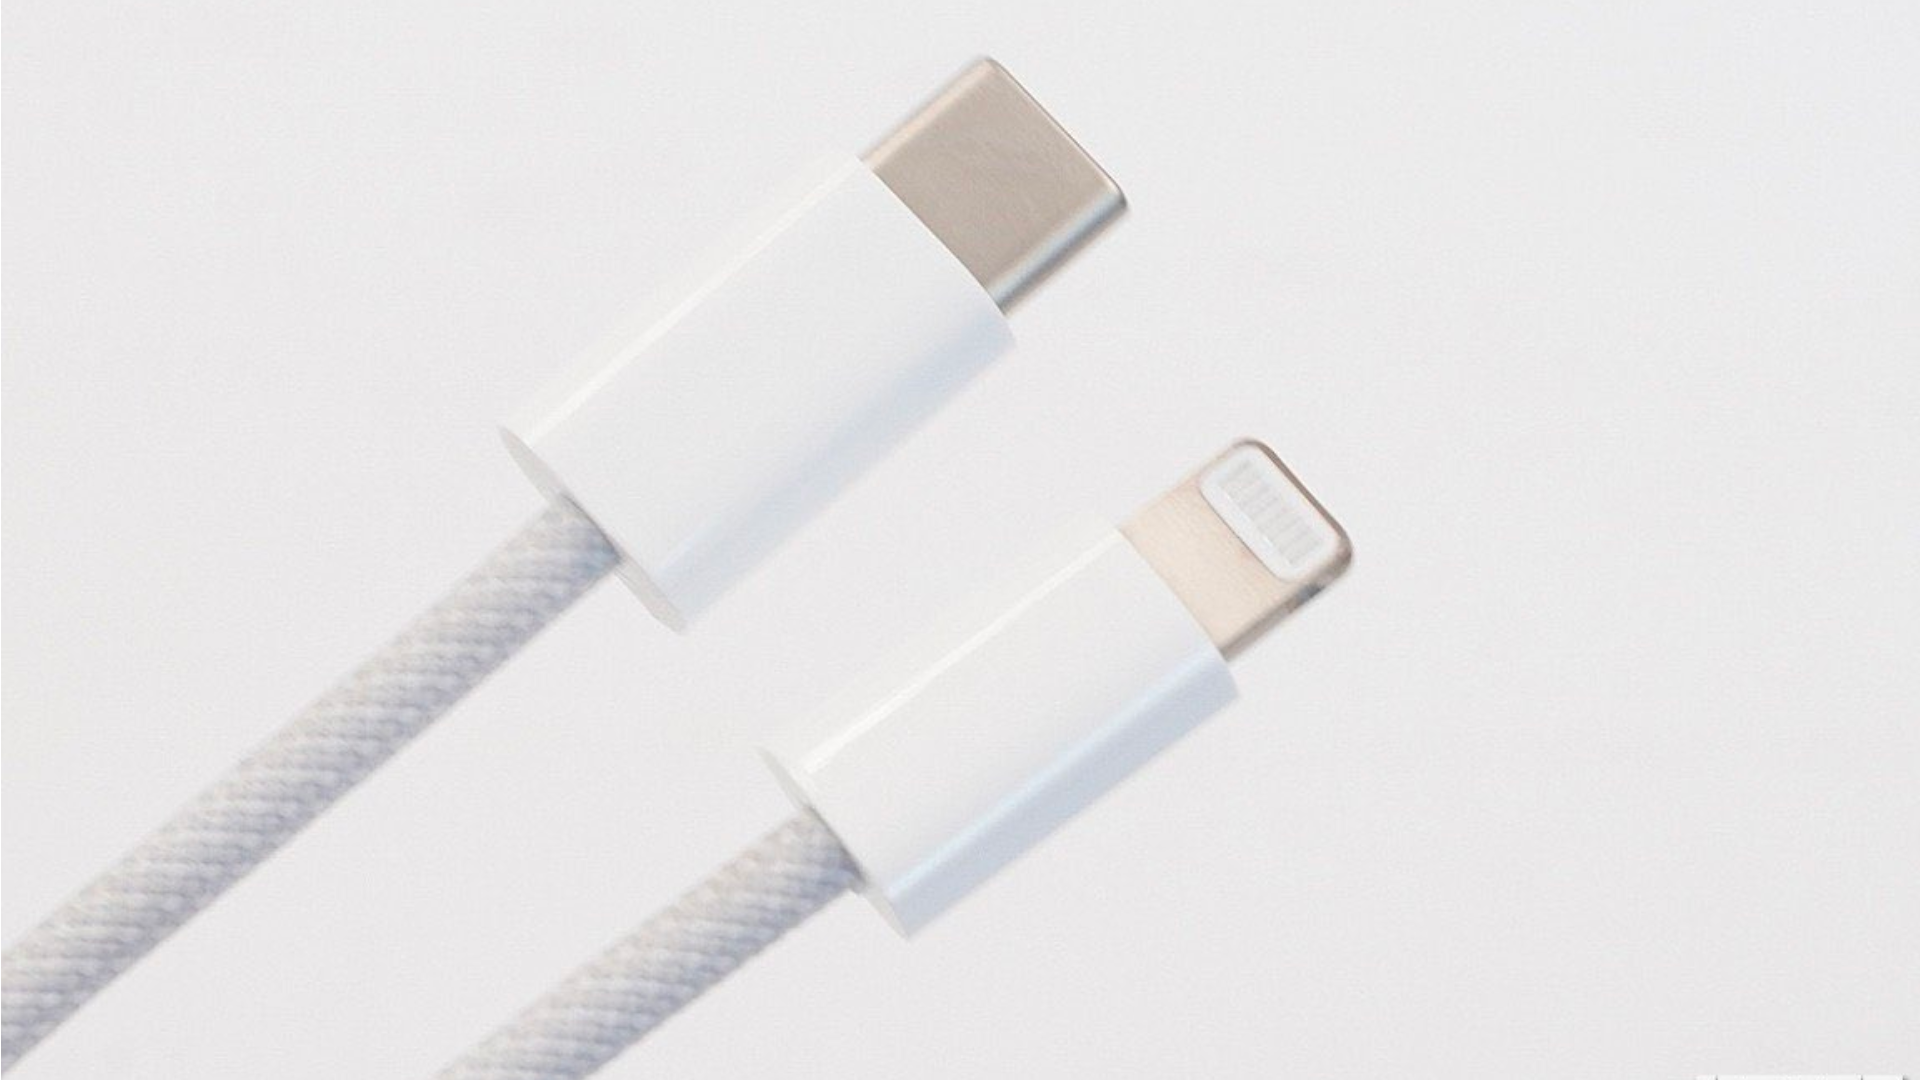 Måling Modregning Ged Leaker claims iPhone 12 will come with new Lightning to USB-C braided cable  - 9to5Mac